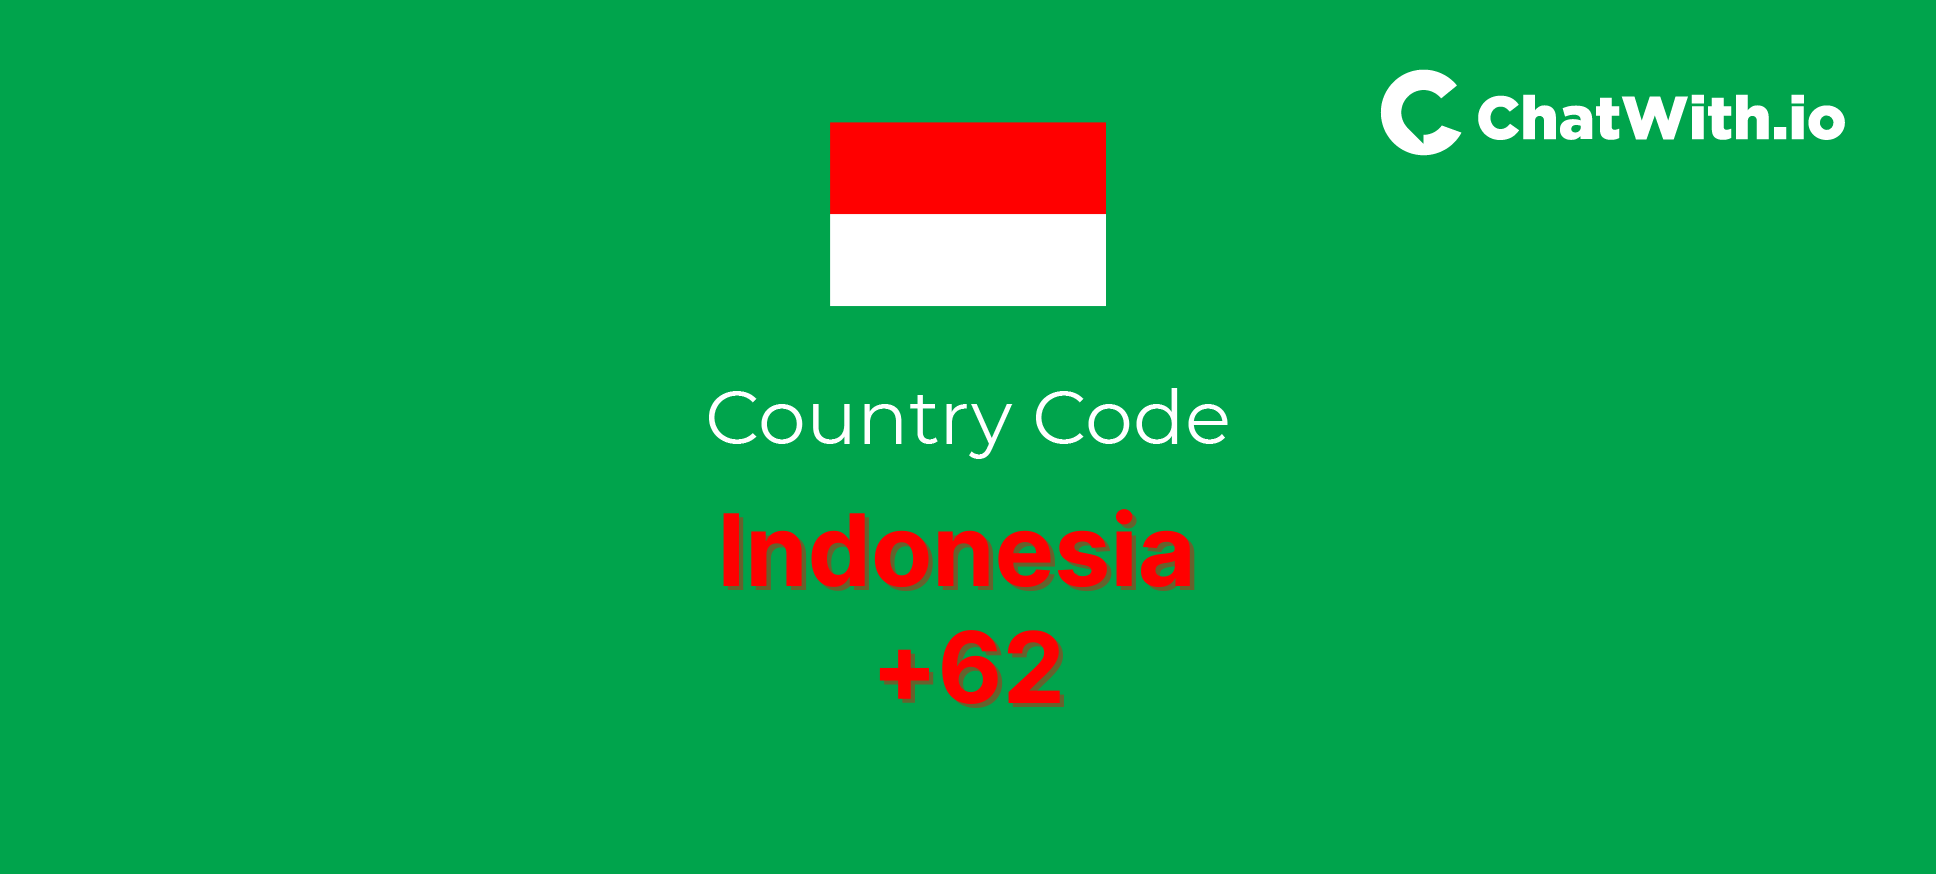  A green background with a red and white Indonesian flag in the top left corner and the words 'Country Code Indonesia +62' in red text.